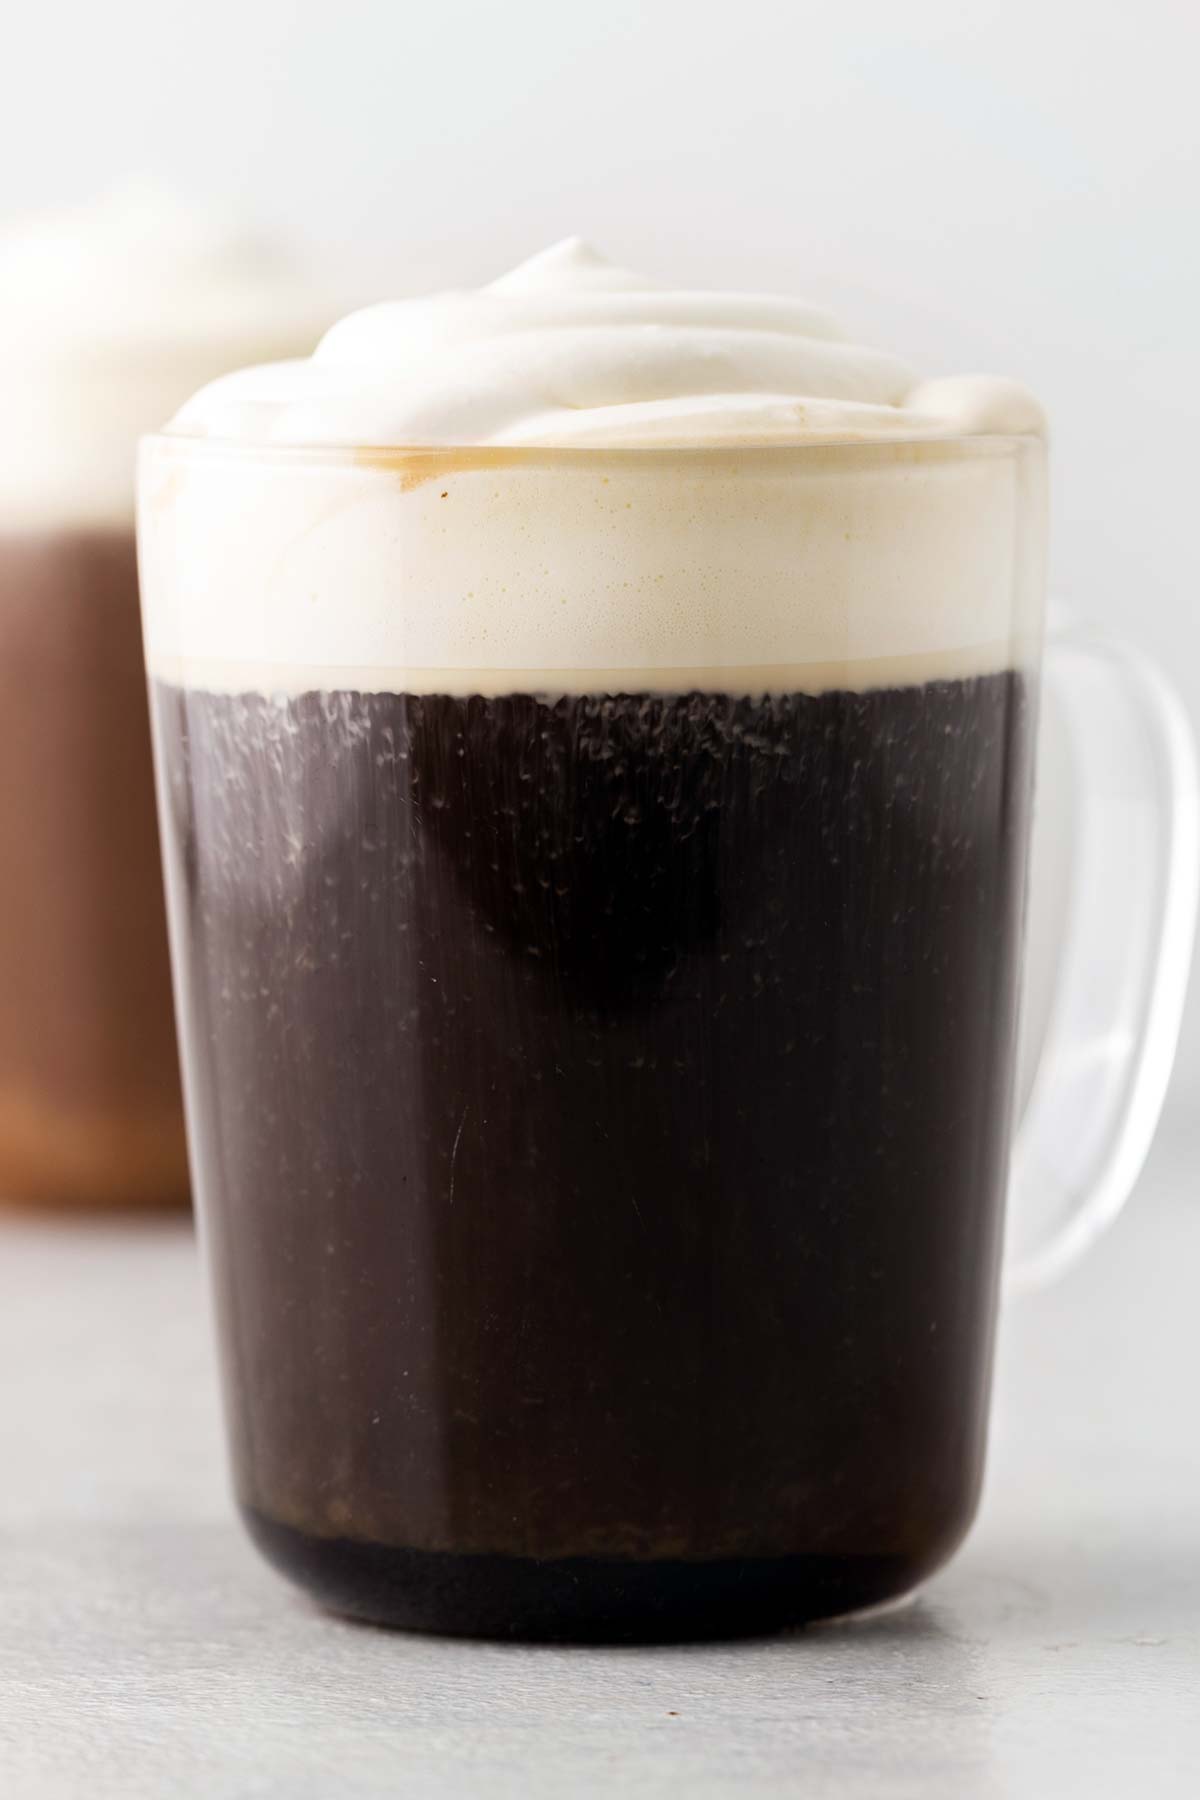 A completed Irish coffee with a generous dollop of soft cream on top.